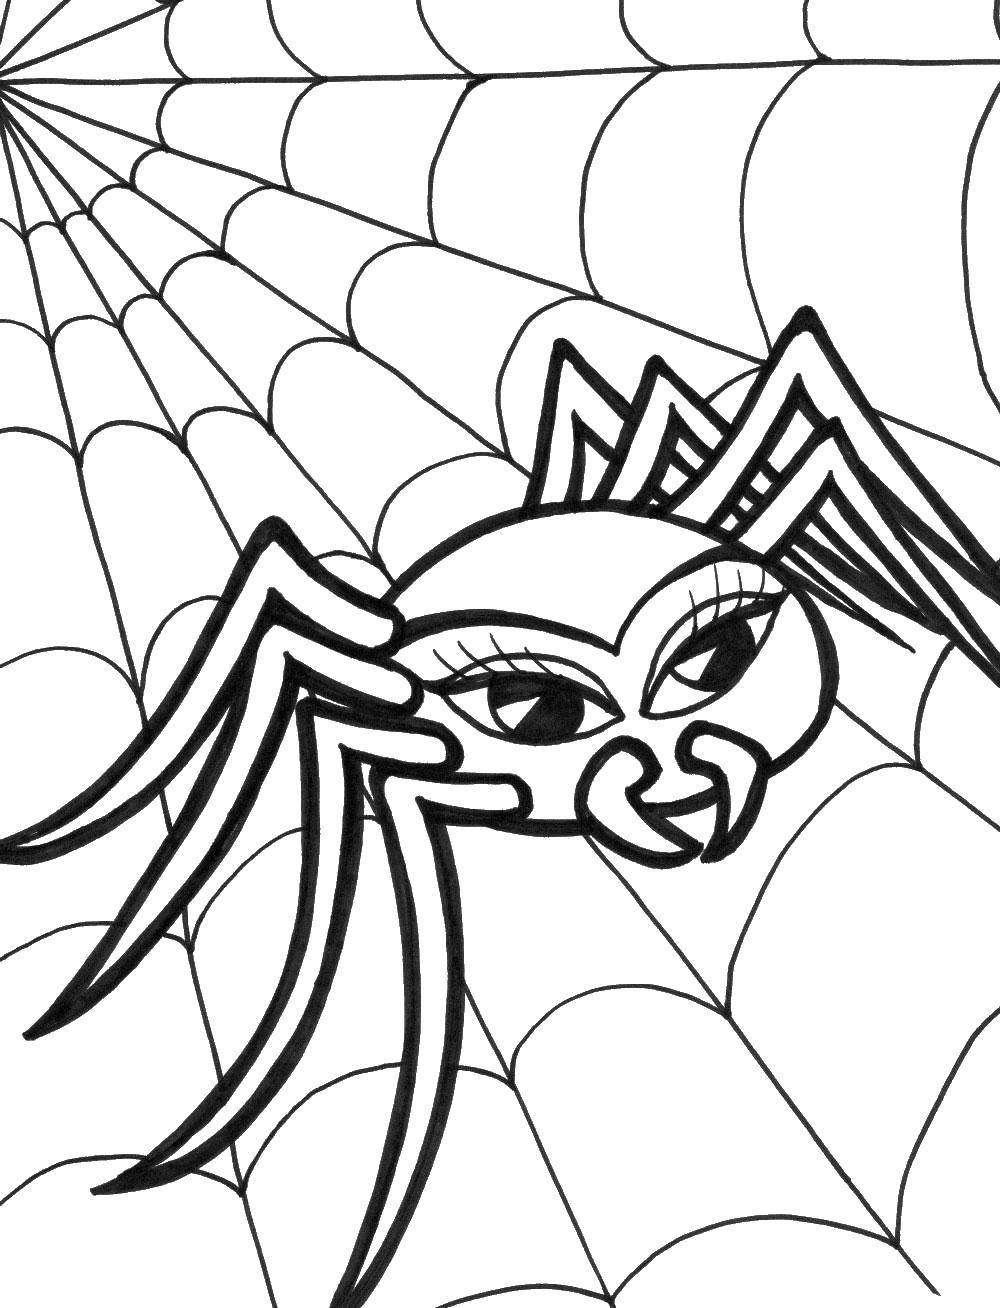 Coloring Black widow. Category spiders. Tags:  spider, web, insect, the female black widow.